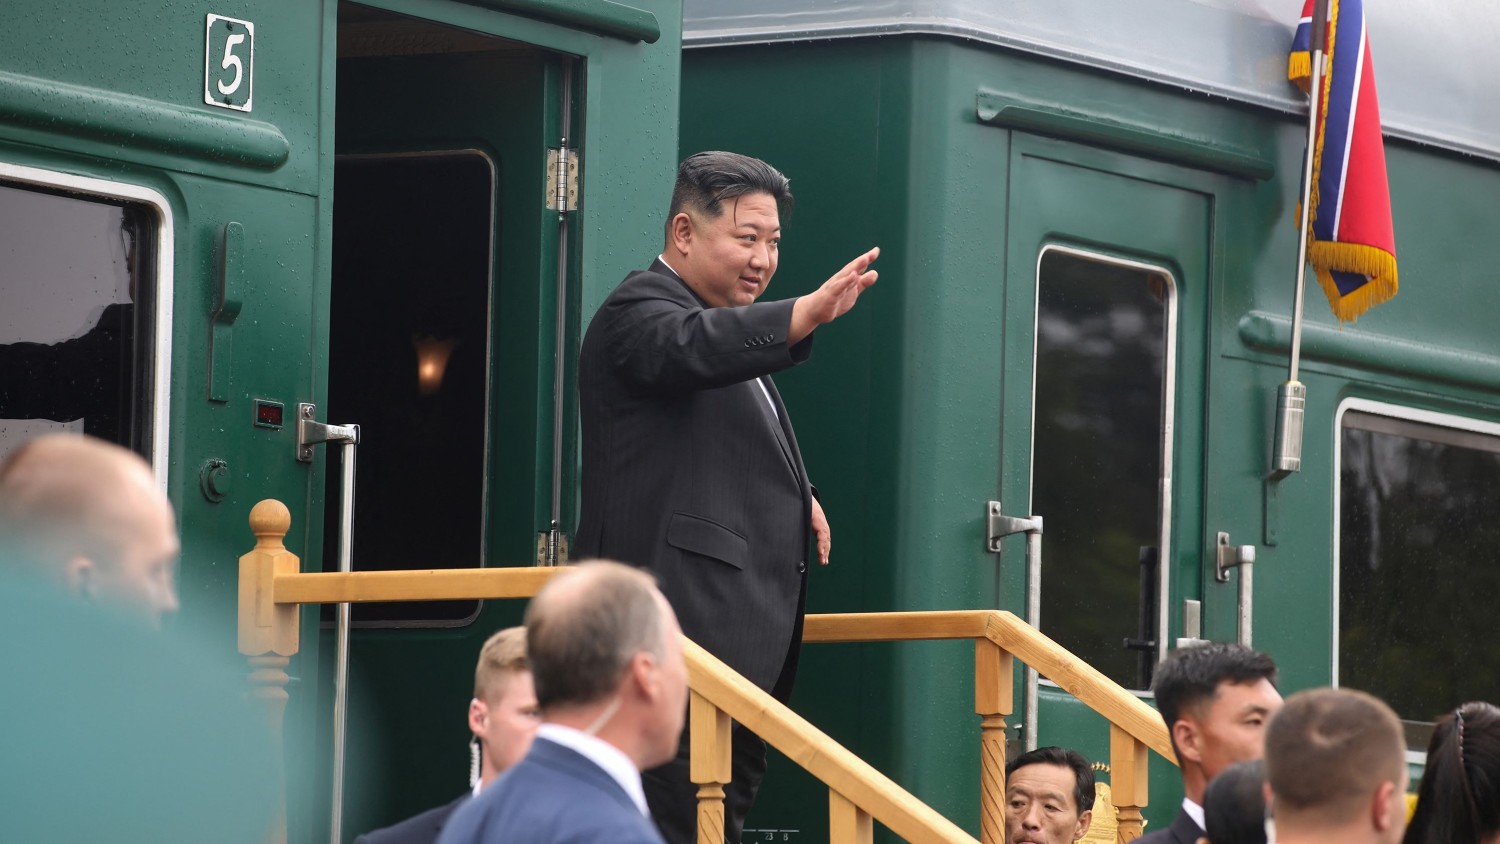 Government of Russia's Primorsky Krai/Handout/Reuters. North Korean leader Kim Jong Un waves as he boards his train at a railway station in the town of Artyom to leave Russia on Sunday.